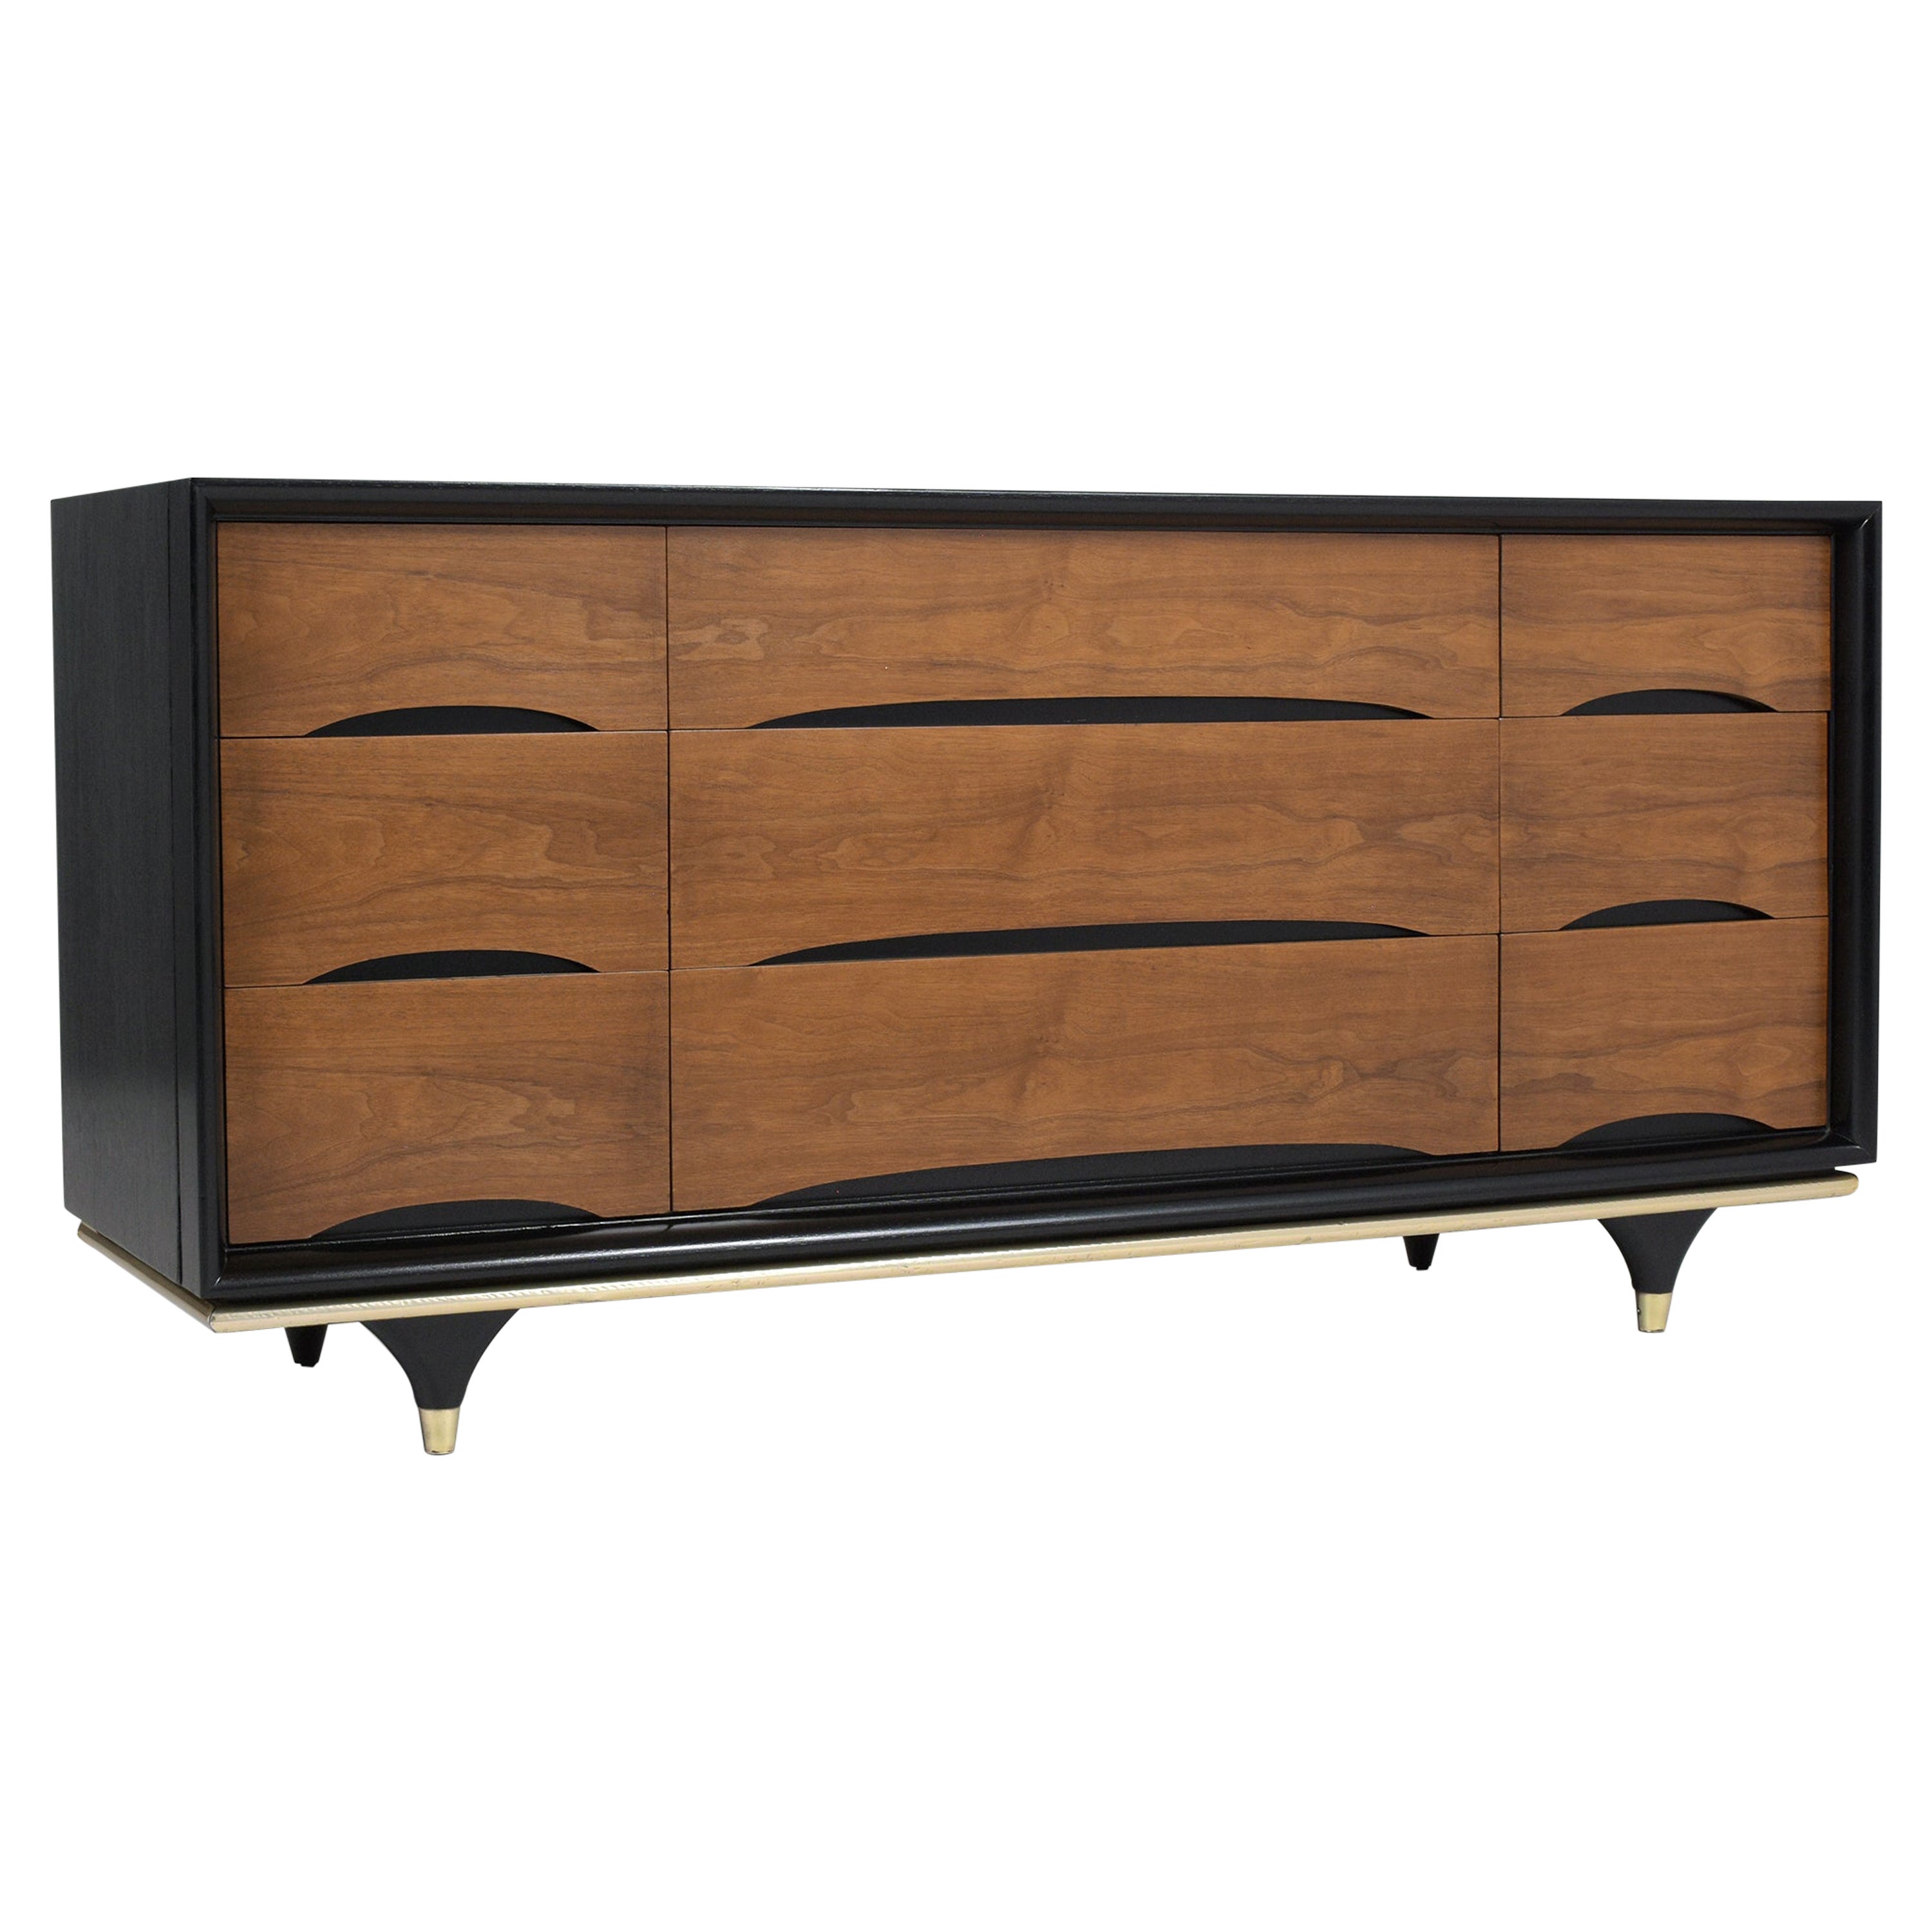 Vintage Walnut Chest of Drawers: Mid-Century Elegance with Brass Accents